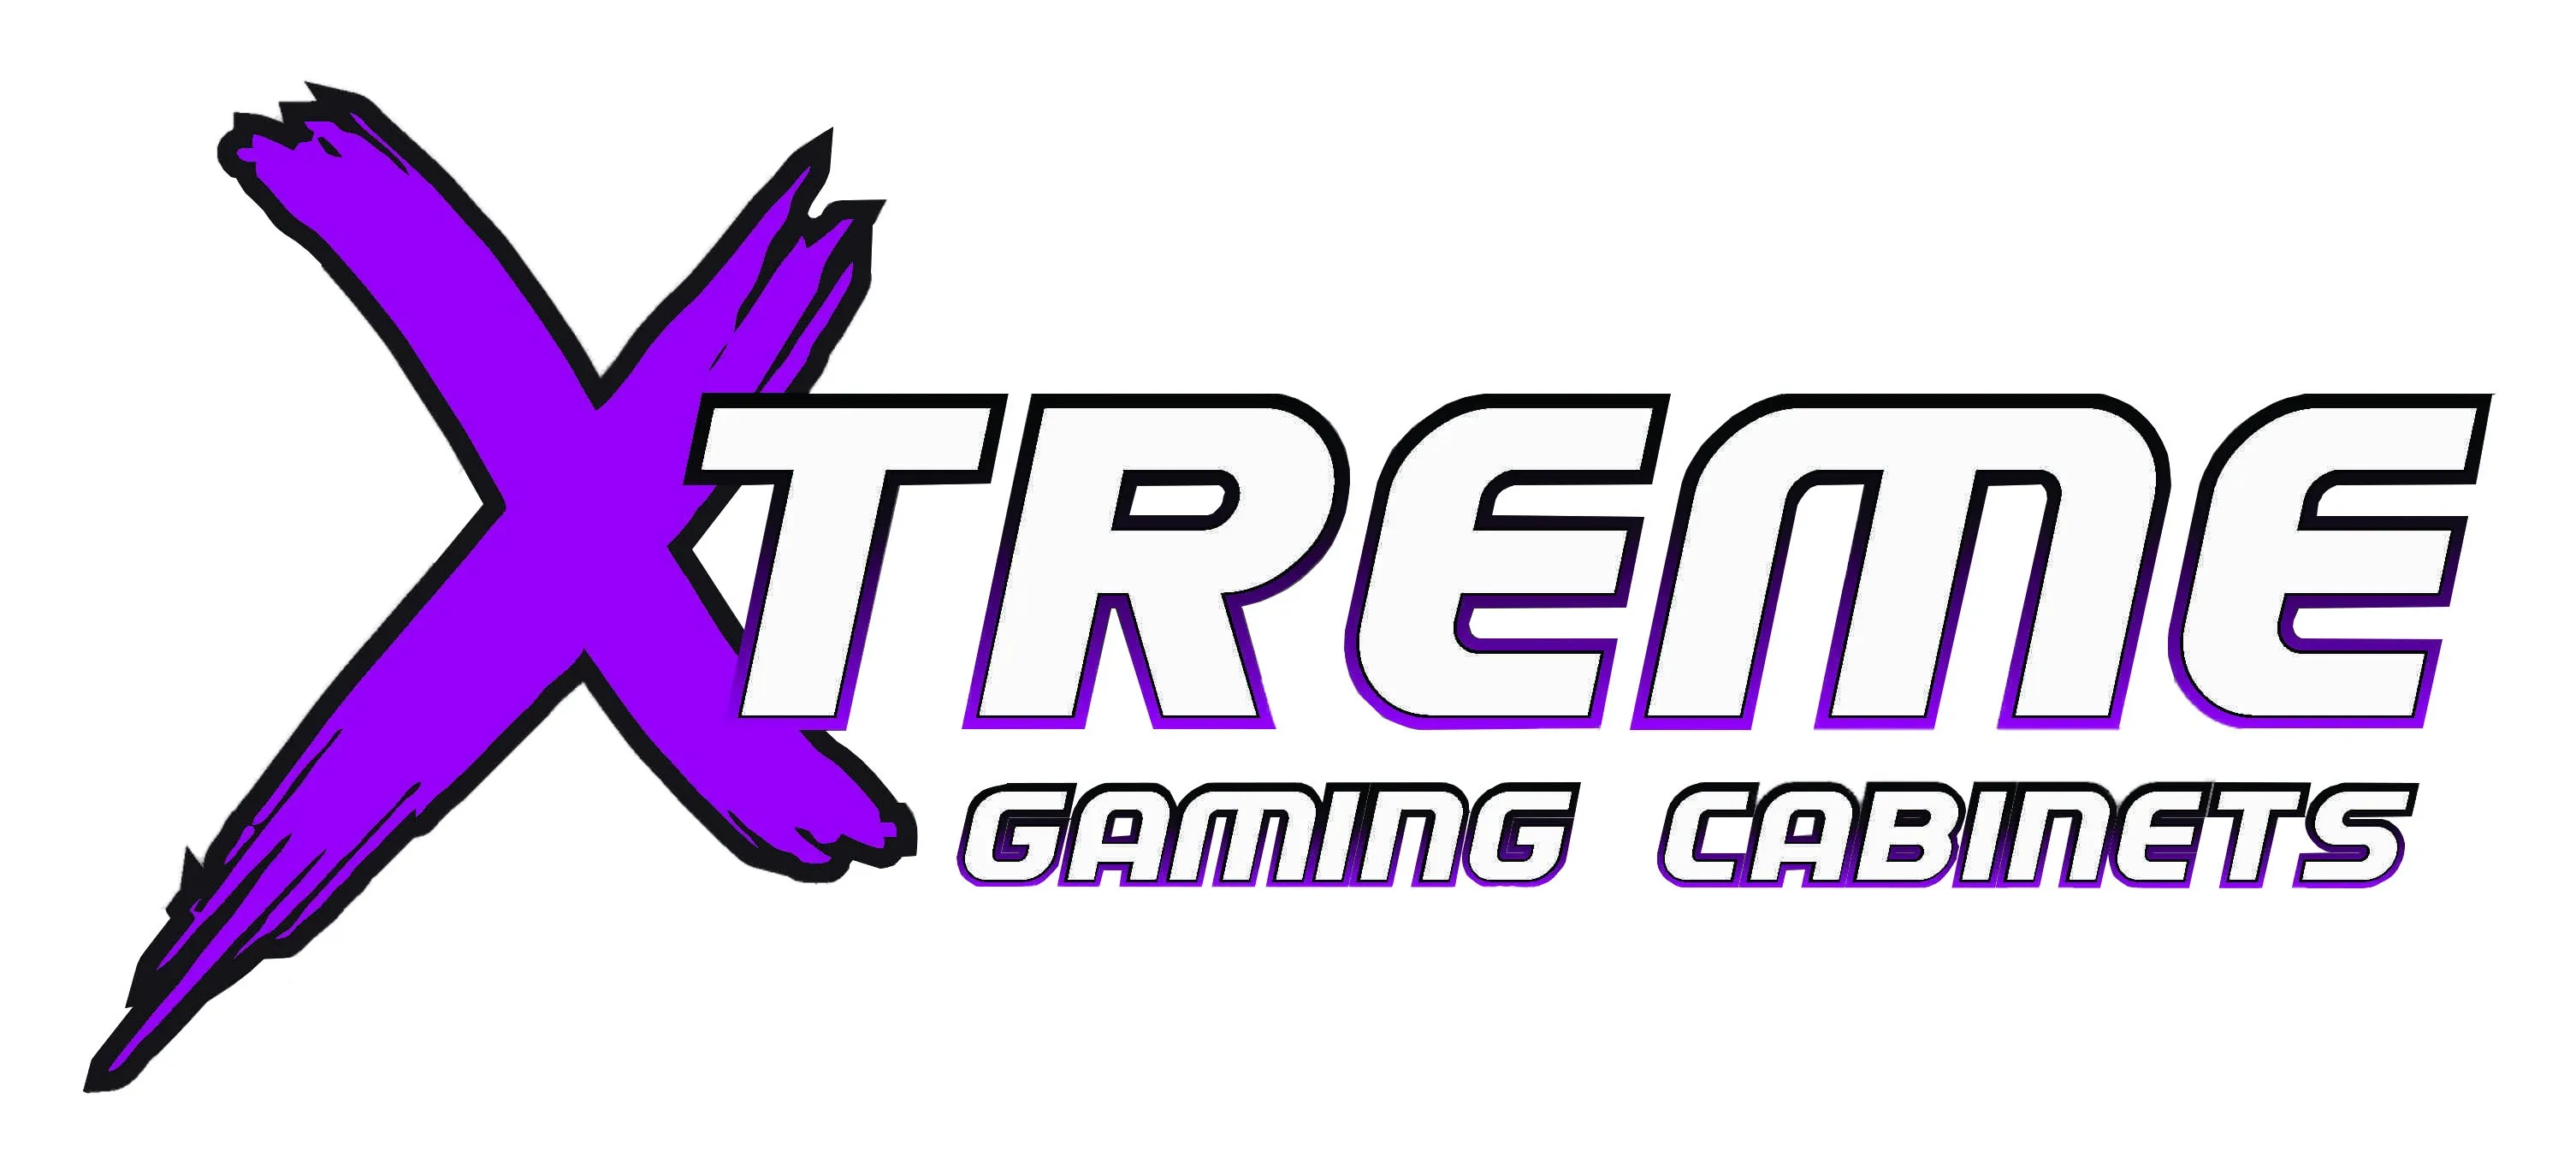 Xtreme Gaming Cabinets